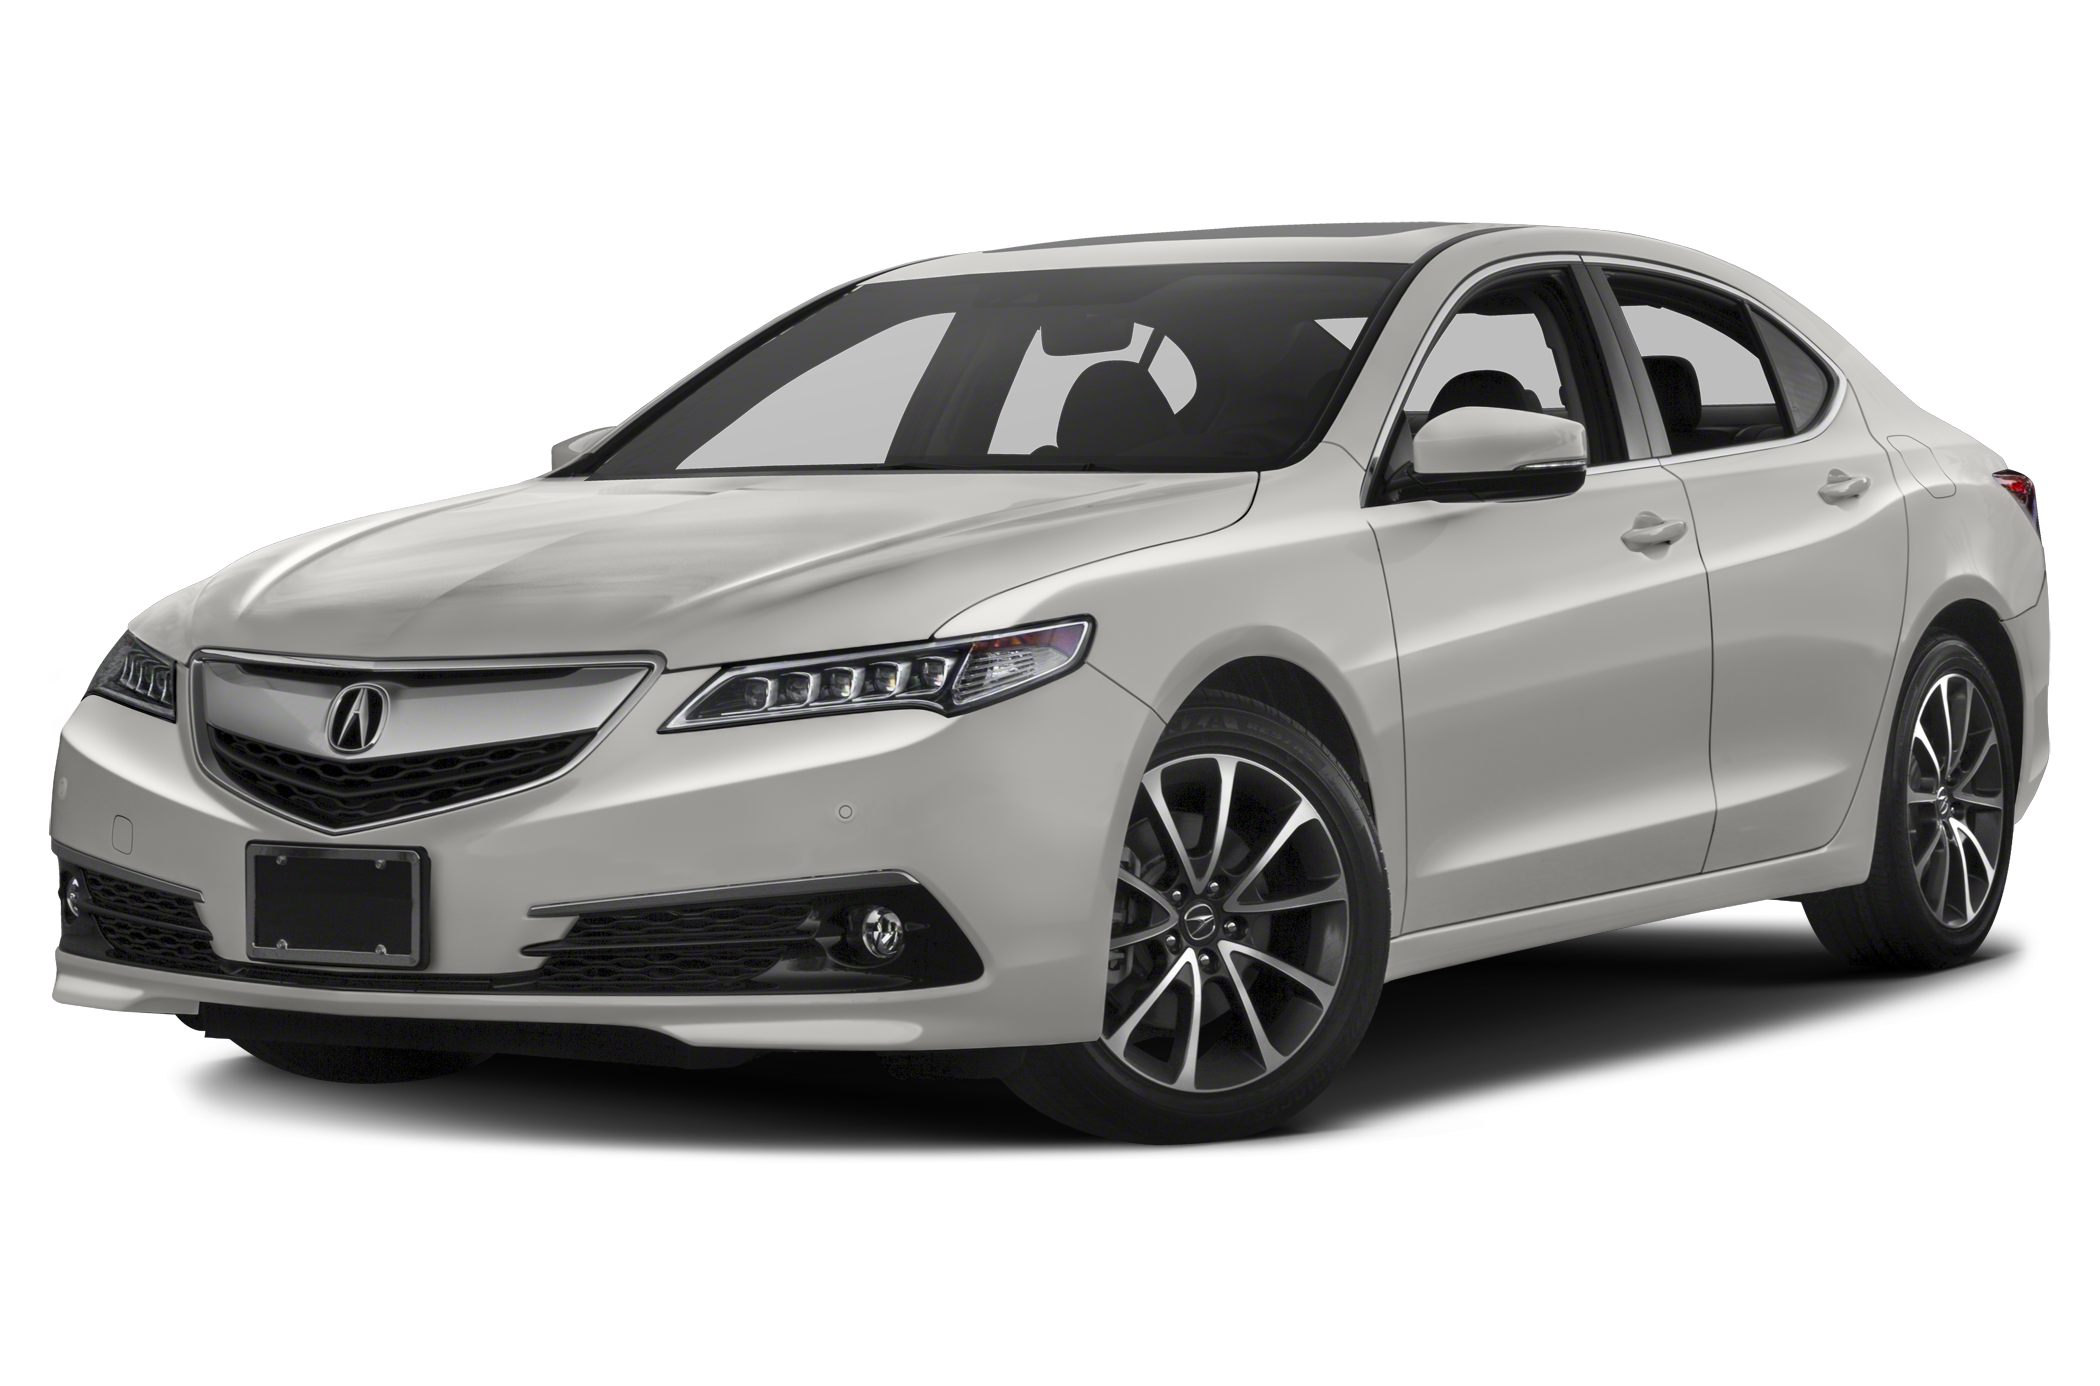 2016 Acura Tlx V6 Advance 4dr Front Wheel Drive Sedan Pictures